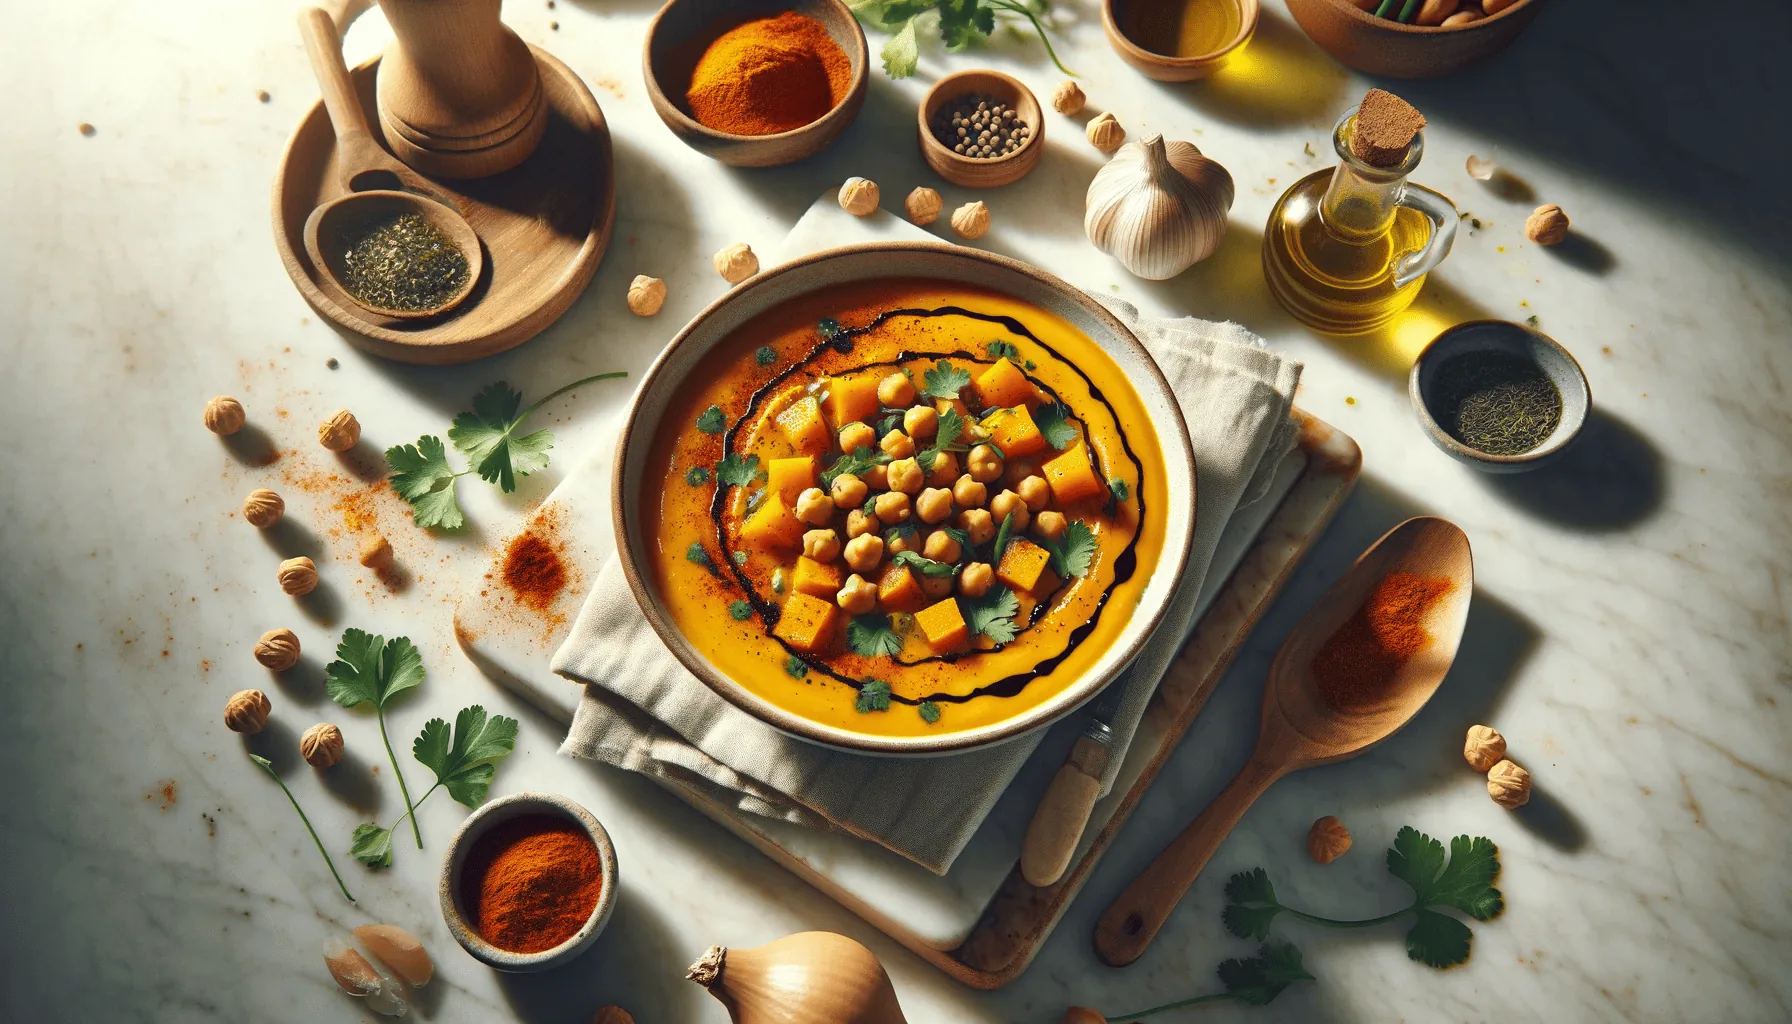 Butternut squash and chickpea soup, ready to serve